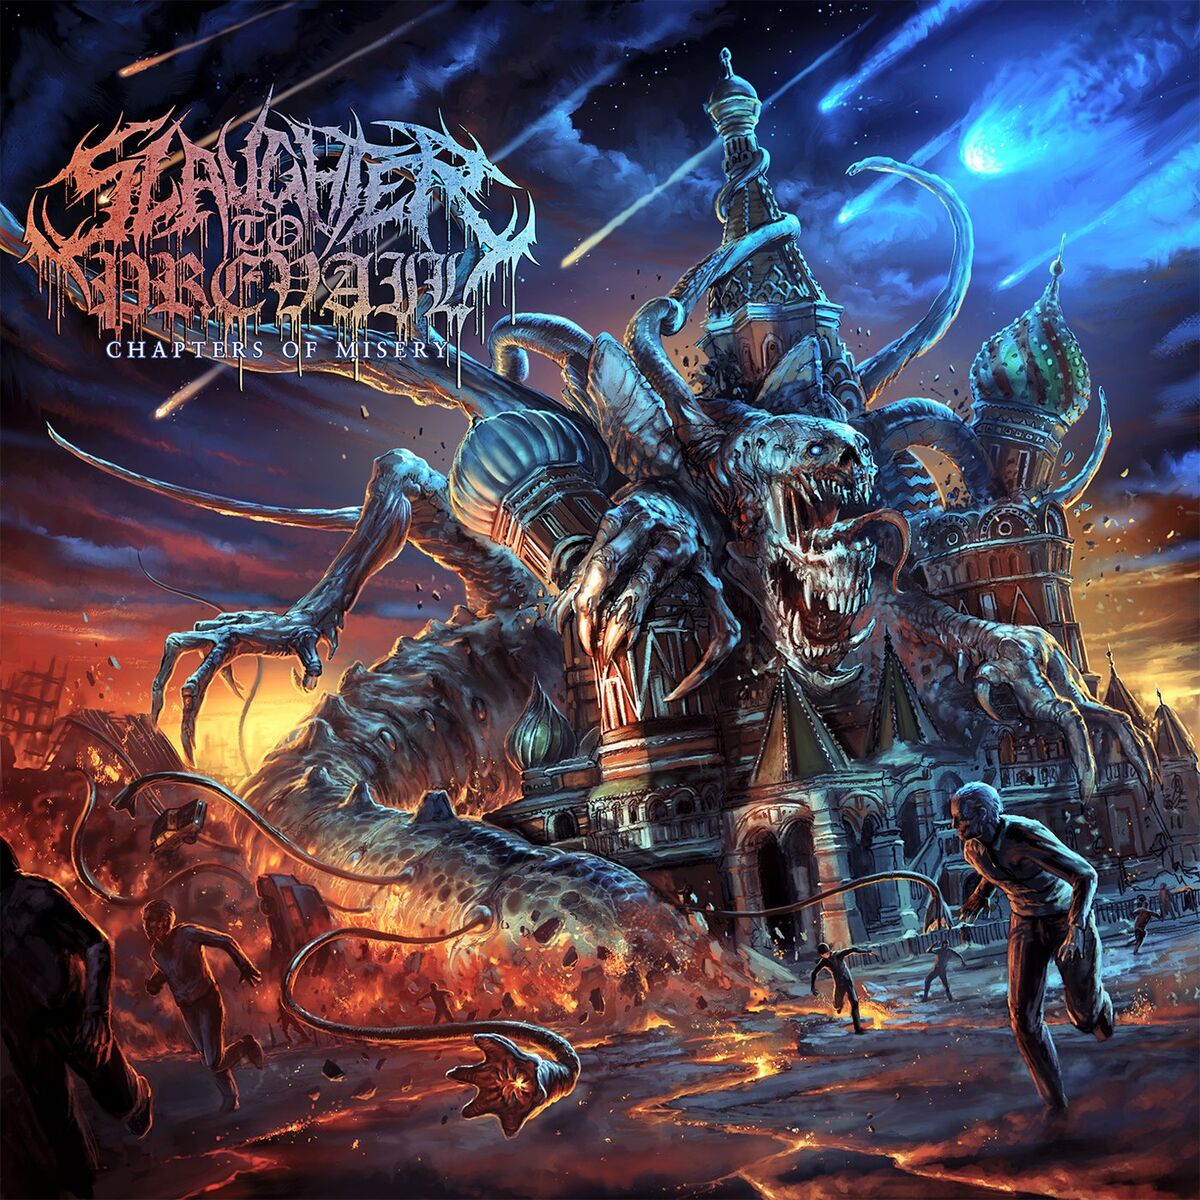 Slaughter To Prevail: albums, songs, playlists | Listen on Deezer